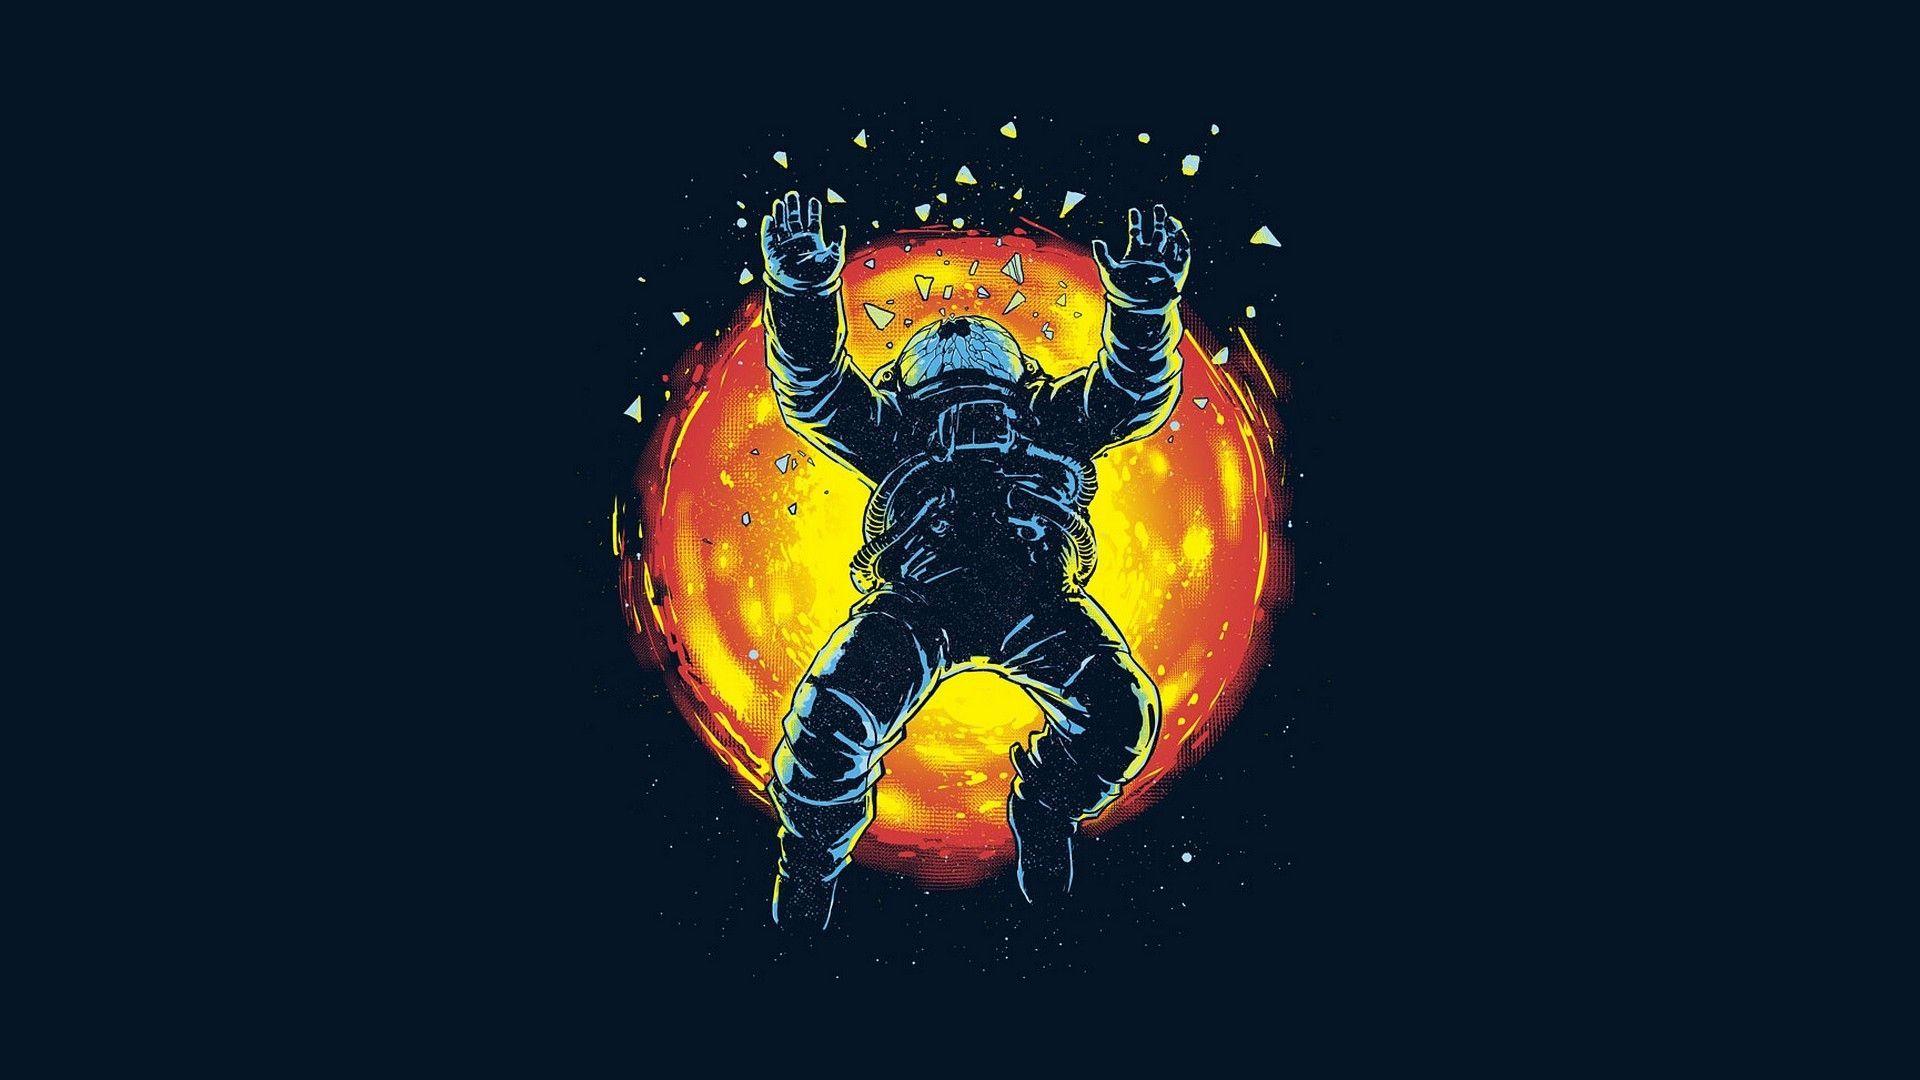 Astronaut Wallpaper High Quality Resolution. Gaming